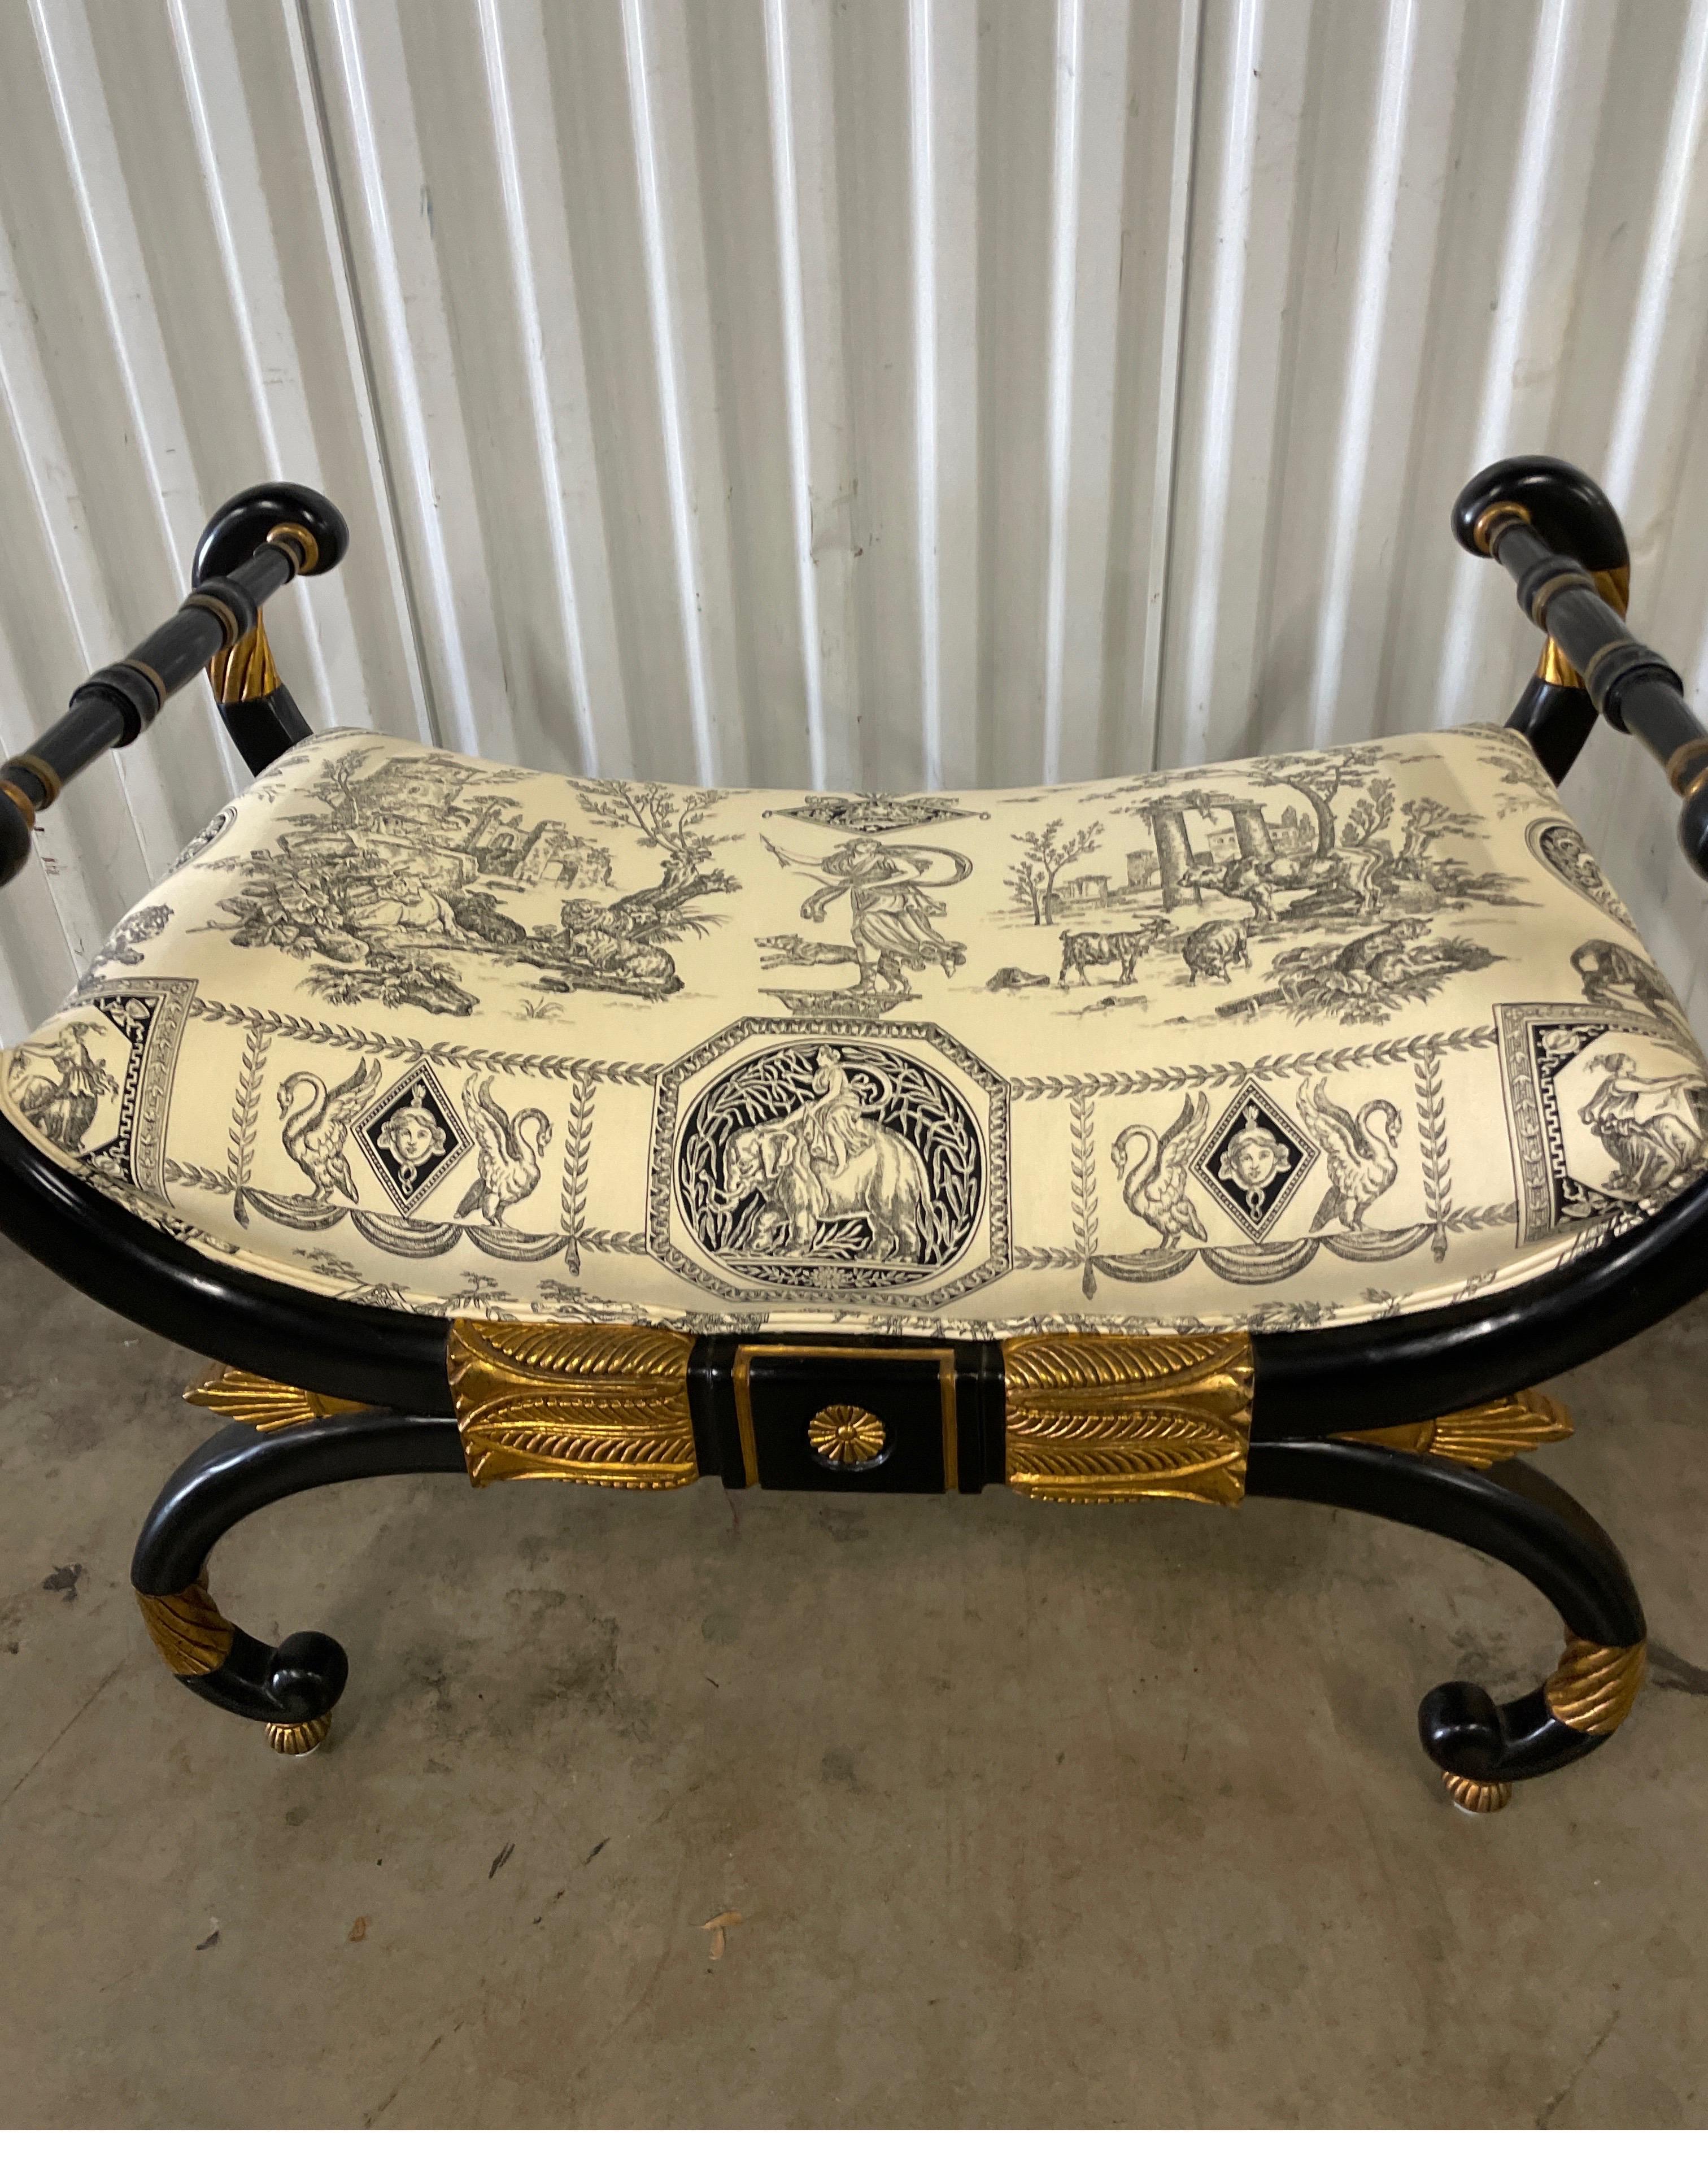 Striking vintage Neoclassical style ebonized and gilded bench by Baker Furniture Company. Beautiful newly upholstered seat cushion.